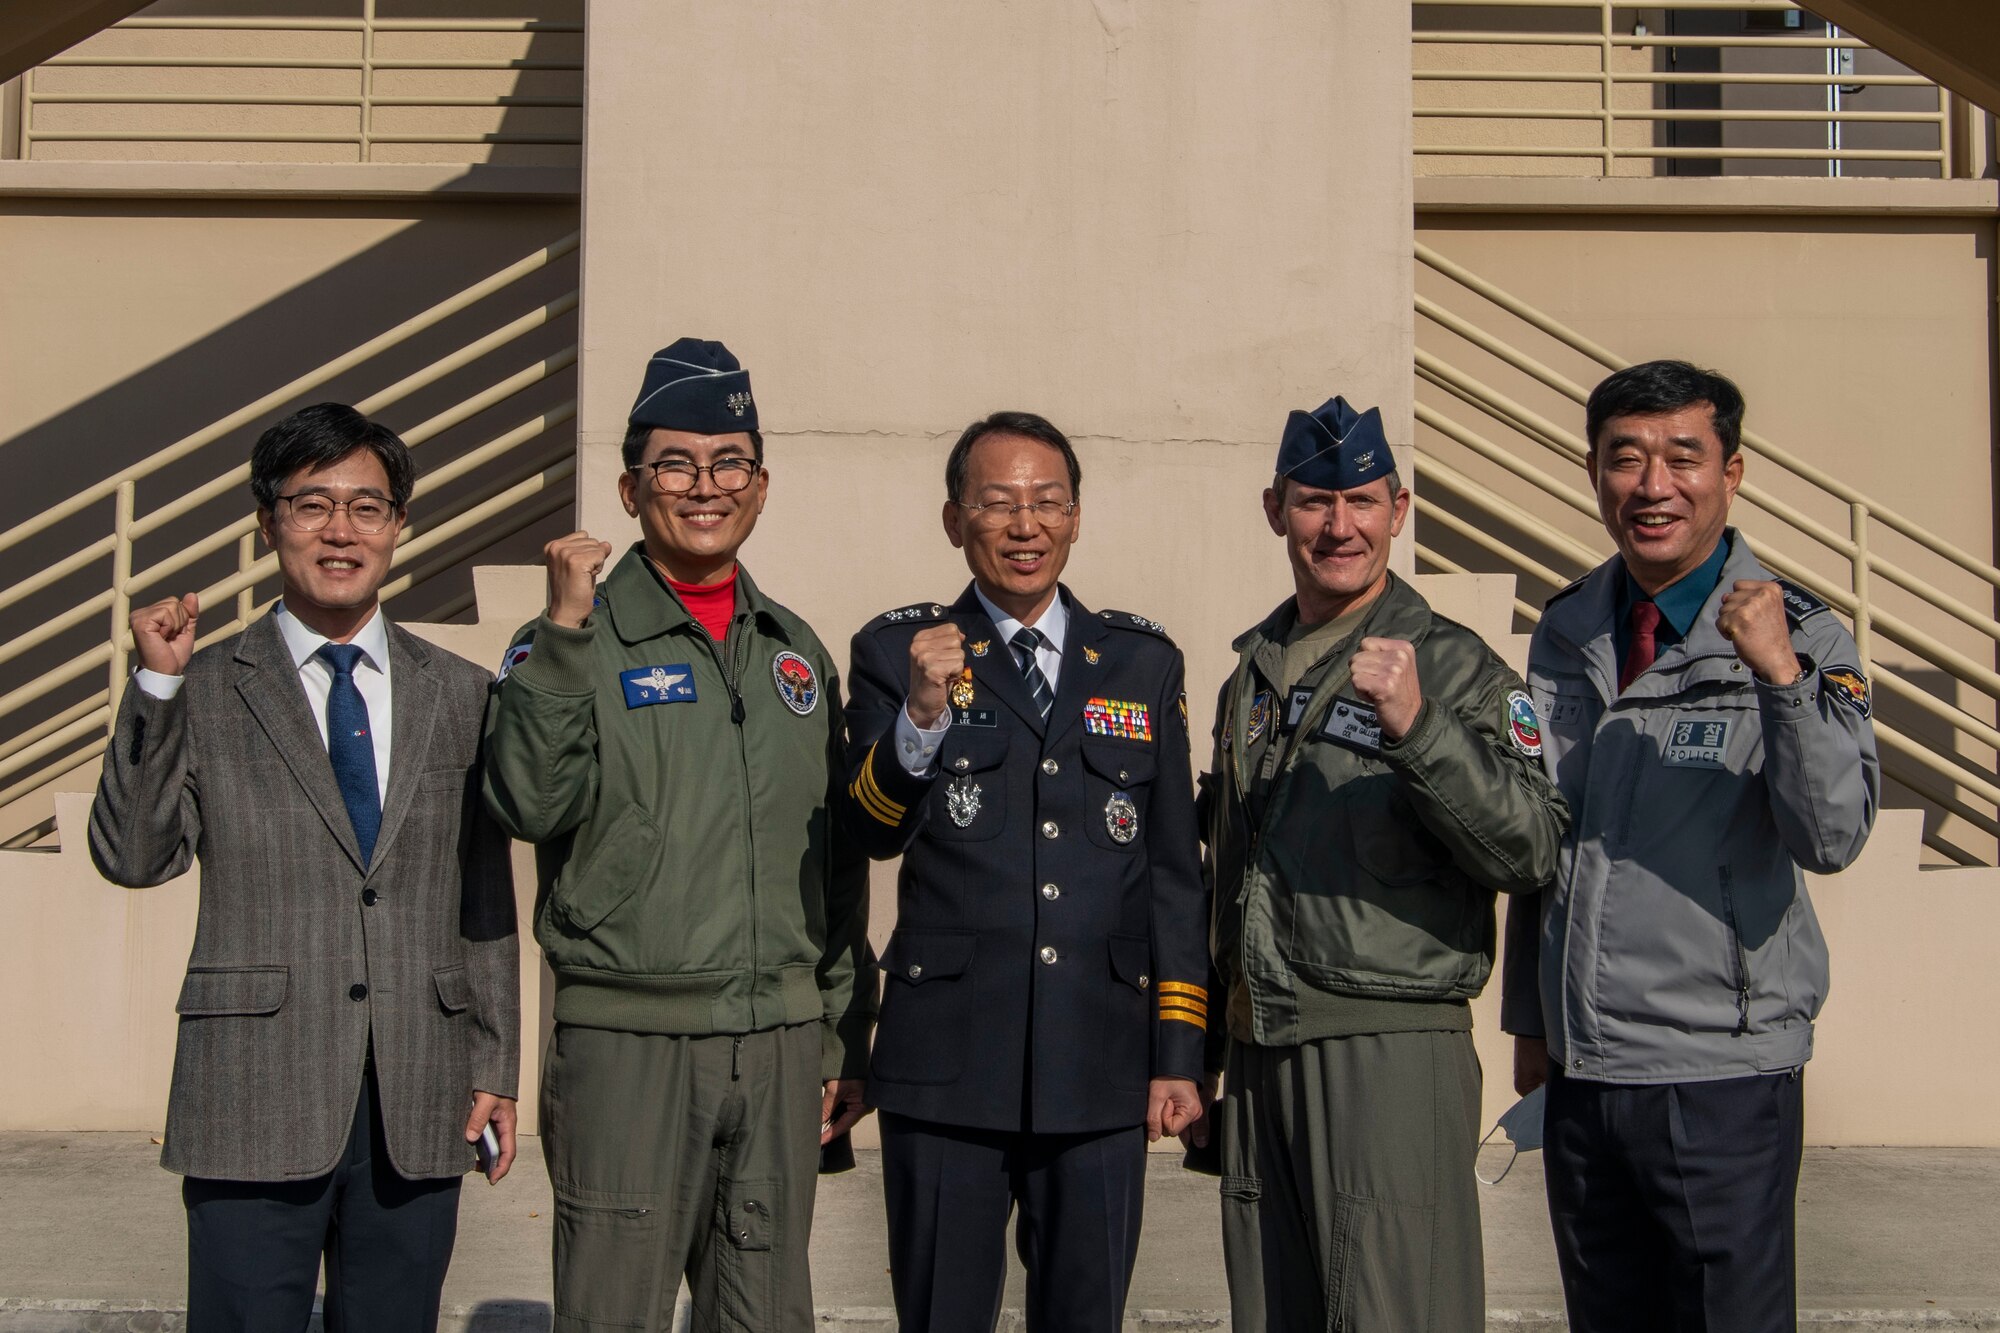 (From left) Mr. Yin Jong-myong, Korean National Police Chief of Gunsan, Col. Kim “Eagle” Do-Hyoung, 38th Fighter Group commander, Mr. Yi Hyong-se, KNP commissioner of Jeonbuk Province, Col. John “Wolf” Gallemore, 8th Fighter Wing commander, Mr. Jong Jae-bong, KNP director of Jeonbuk Province, prepare for a Kunsan Air Base immersion tour at Kunsan AB, Republic of Korea, Nov. 17, 2021. Kunsan hosts an immersion tour for the KNP biannually to provide updates on the economic impact Kunsan has on the local area. (U.S. Air Force photo by Staff Sgt. Jesenia Landaverde)